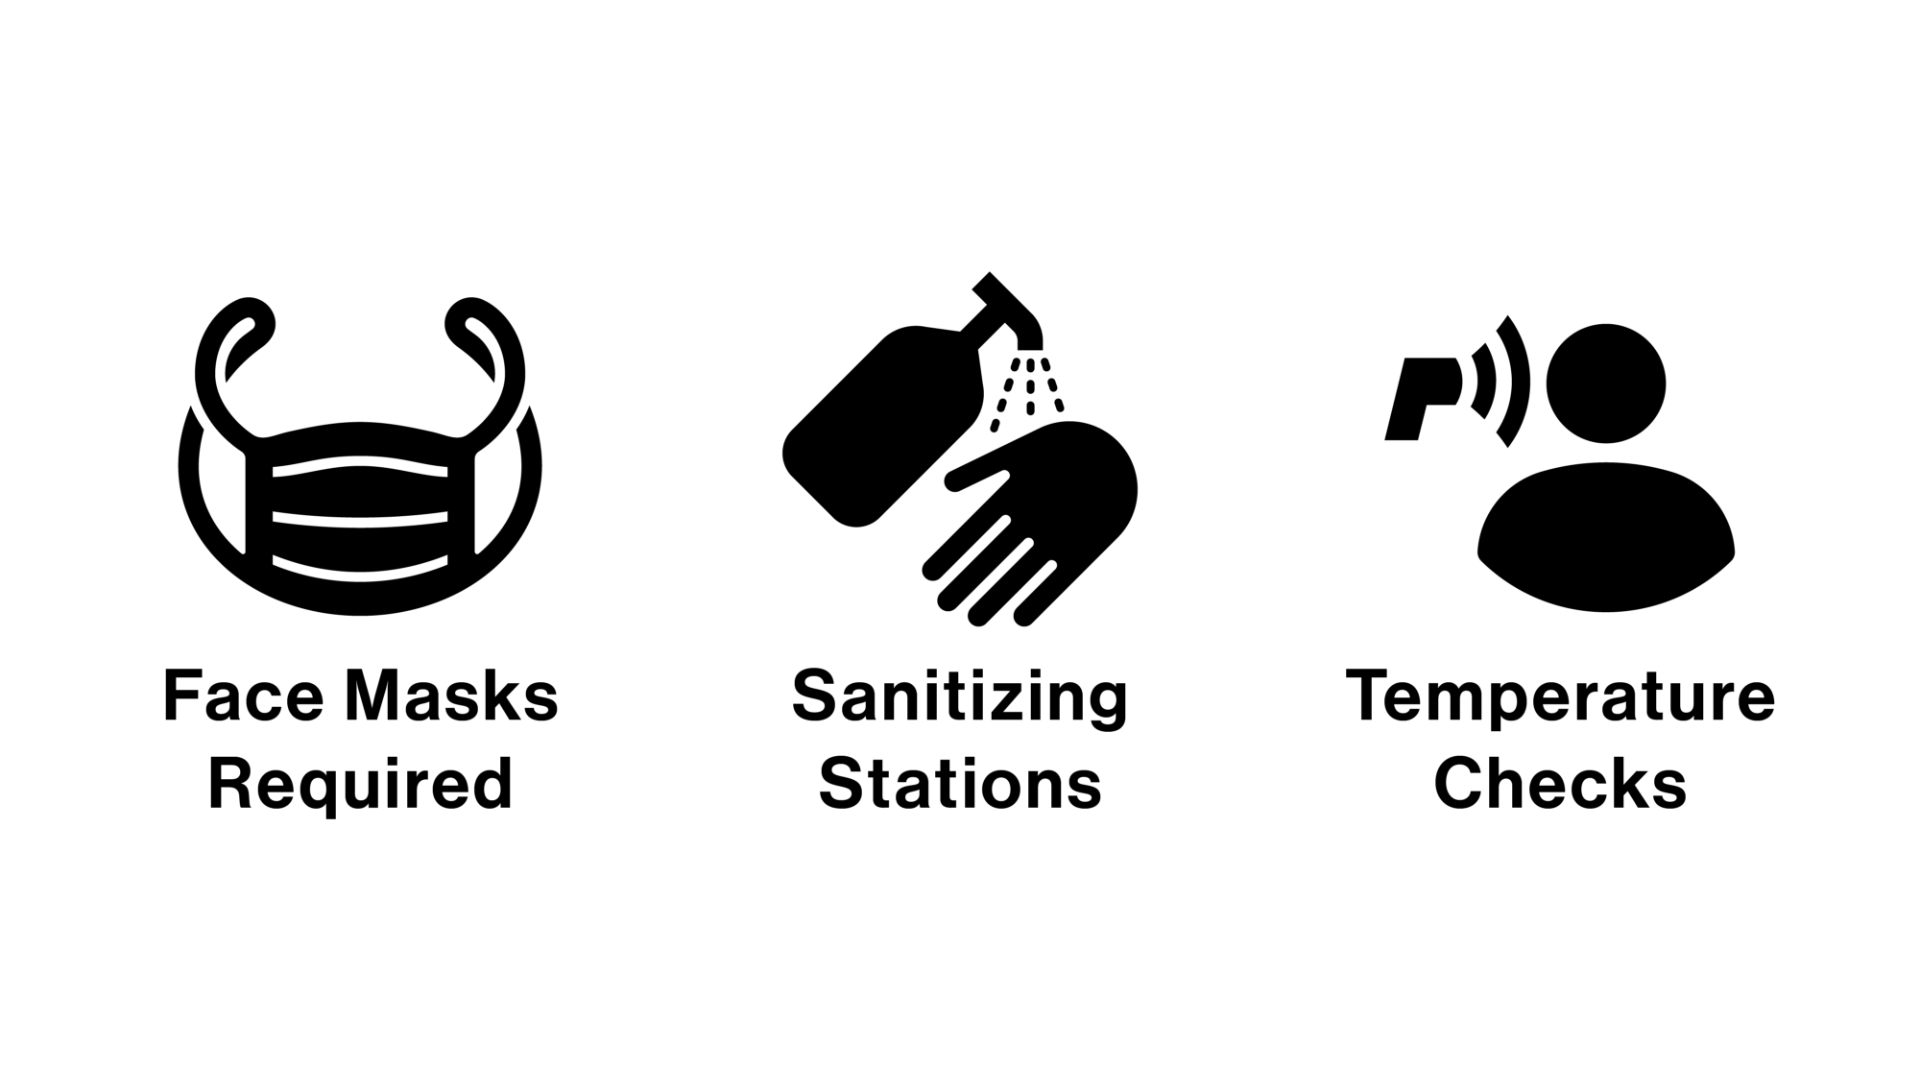 Pictograms portraying countermeasures against COVID-19